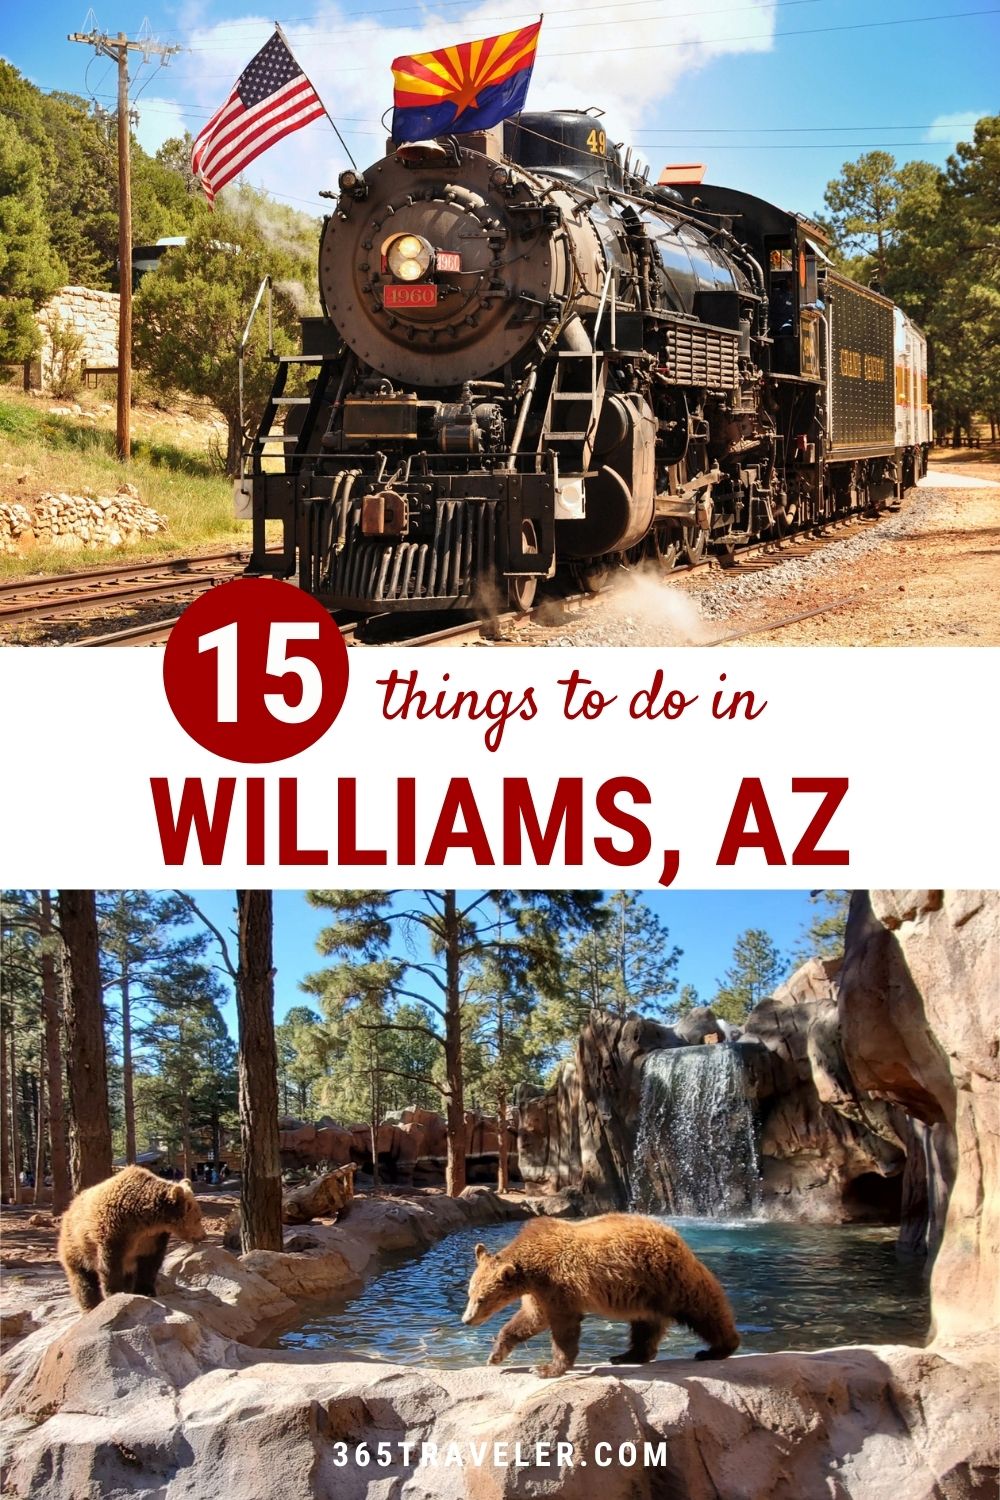 15 FUN THINGS TO DO IN WILLIAMS AZ YOU CAN'T MISS